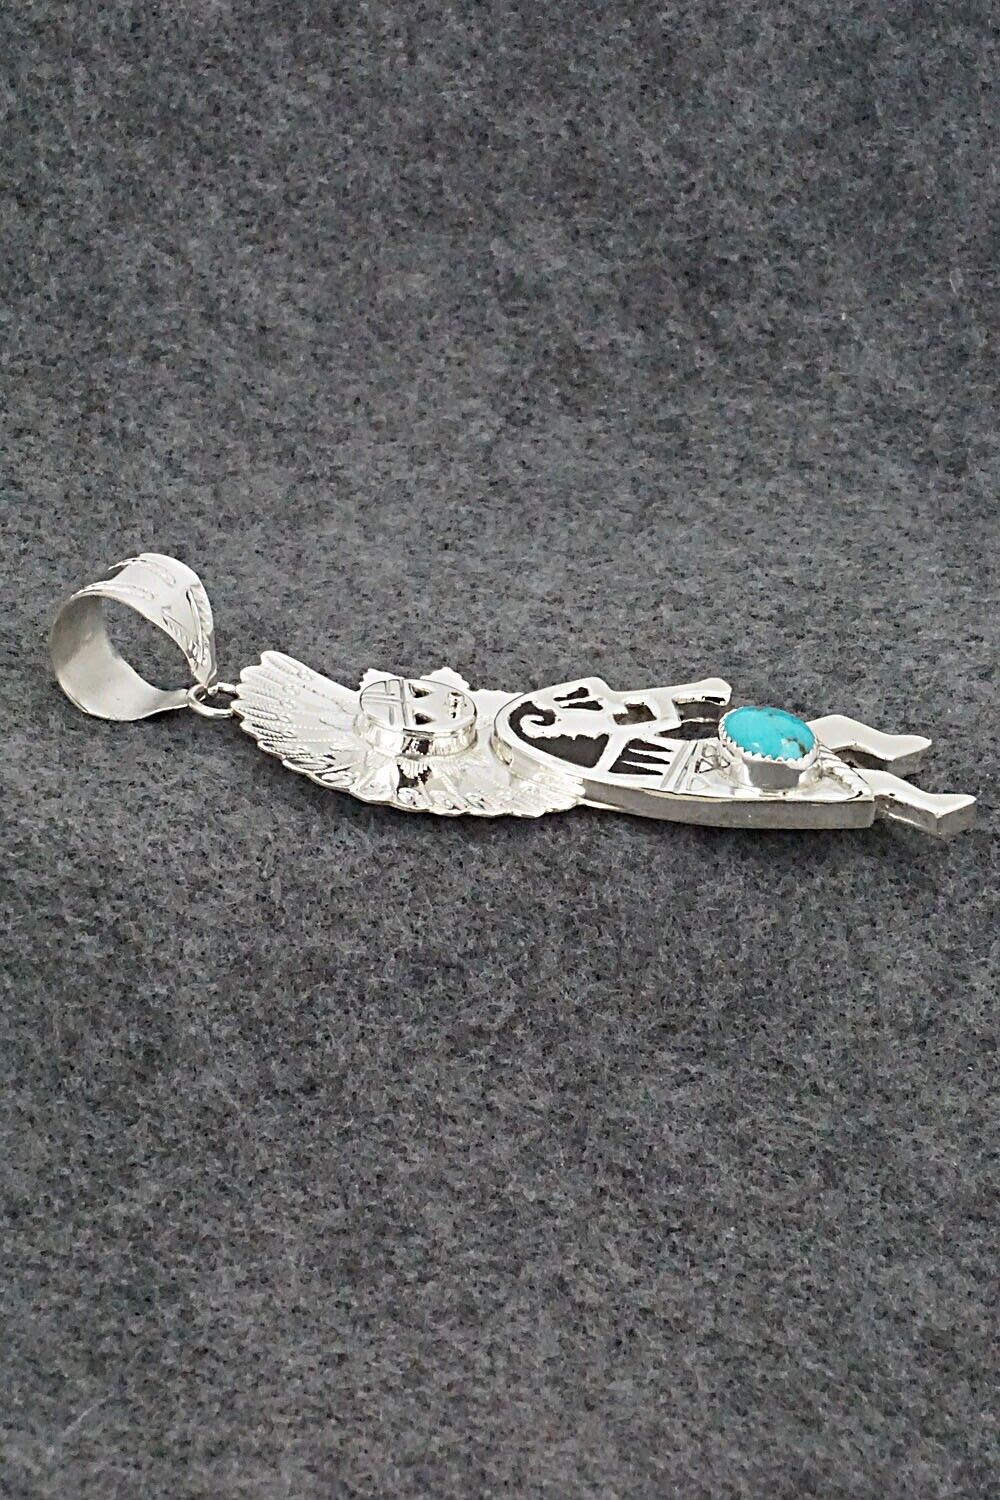 Turquoise & Sterling Silver Pendant - Alanzo Mariano